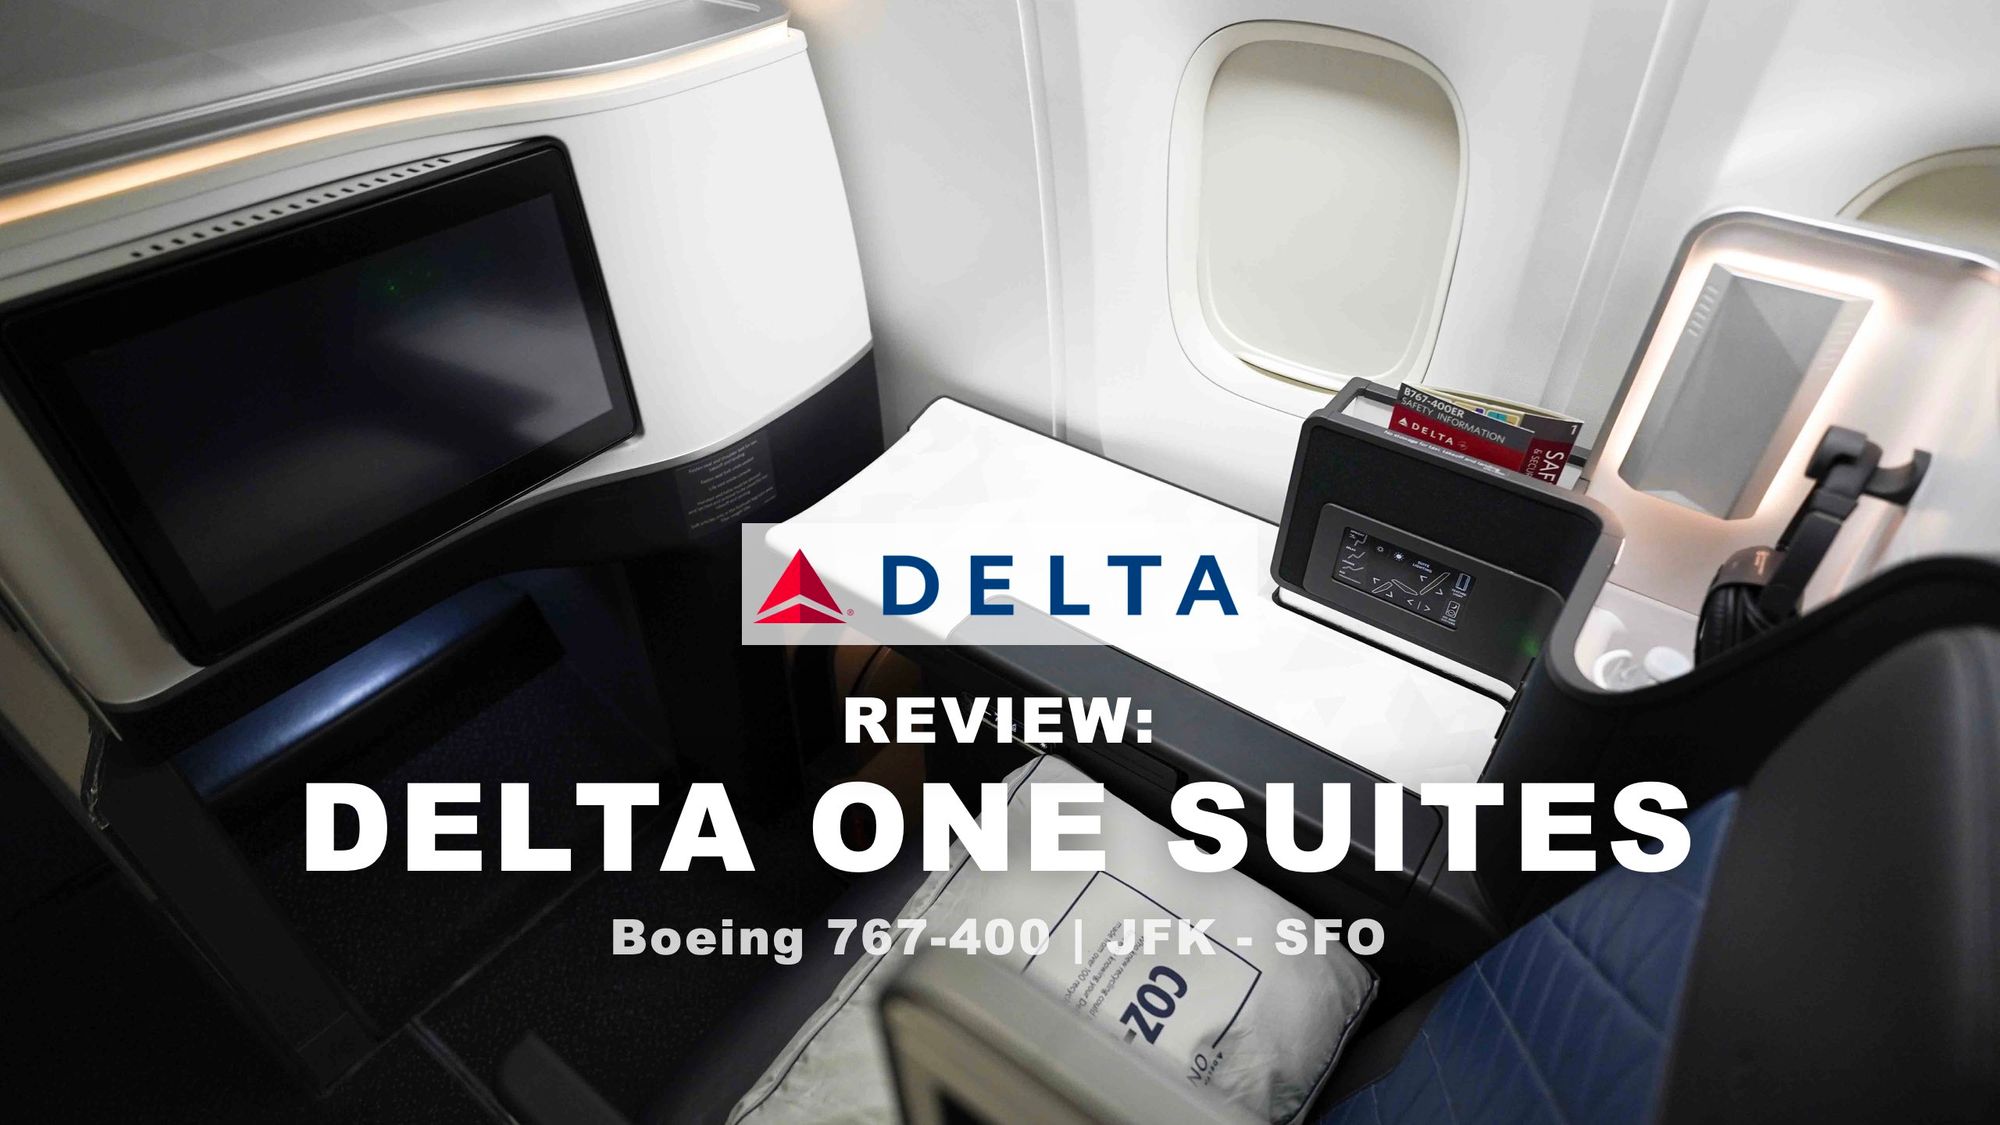 Review: Delta One Suites (Boeing 767-400) New York to San Francisco (JFK – SFO)